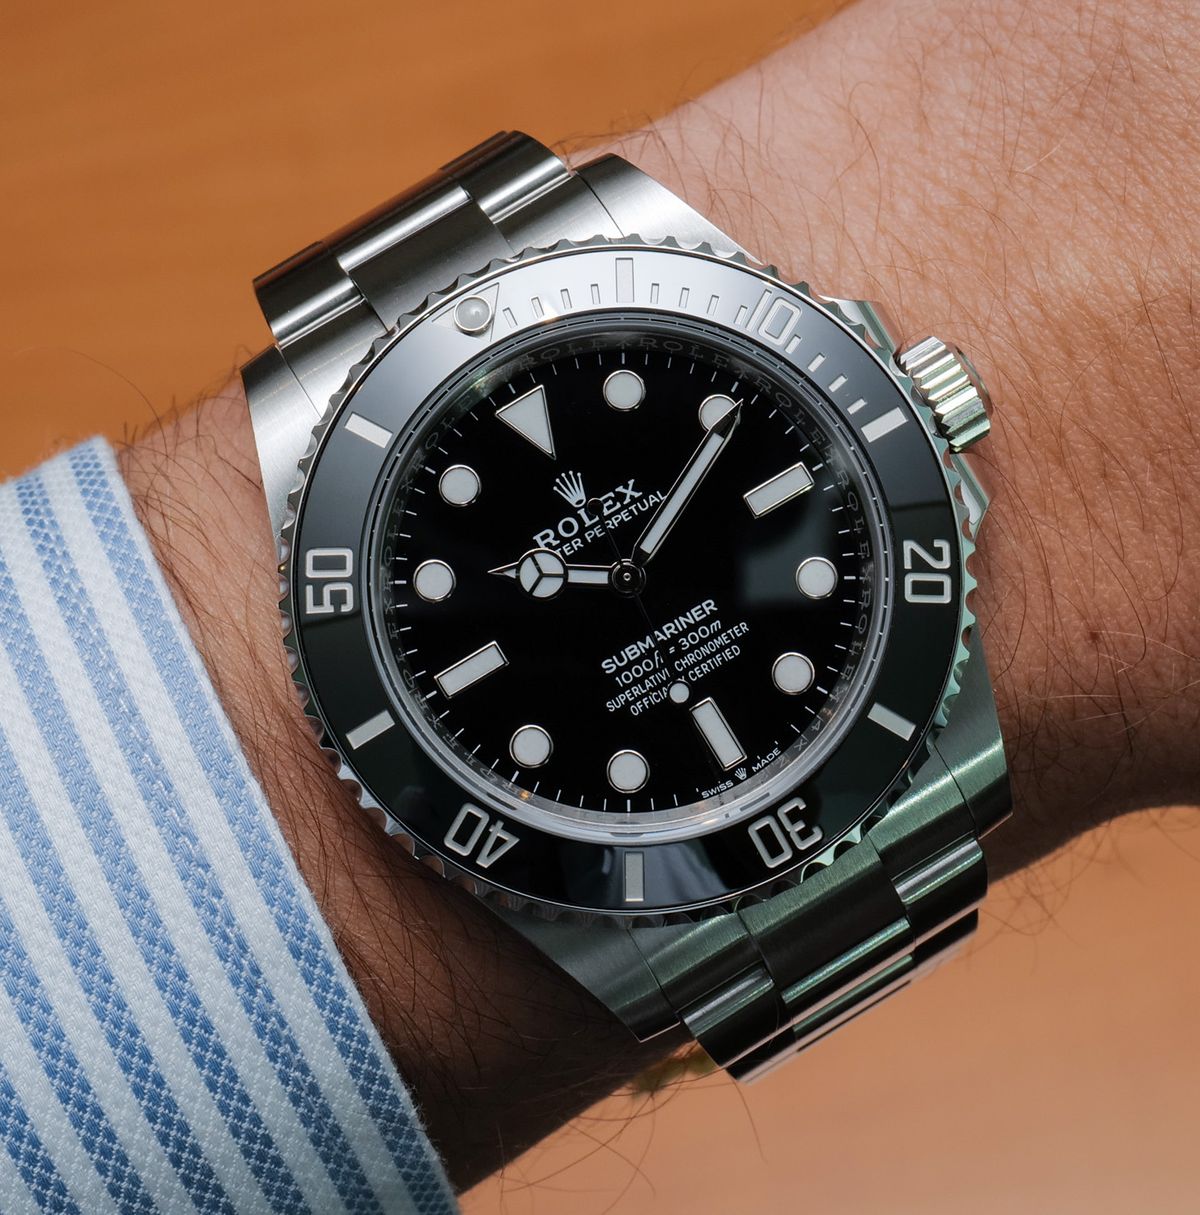 Rolex - Submariner 124060, 126610LN and 126610LV, the new 2020 models, Time and Watches